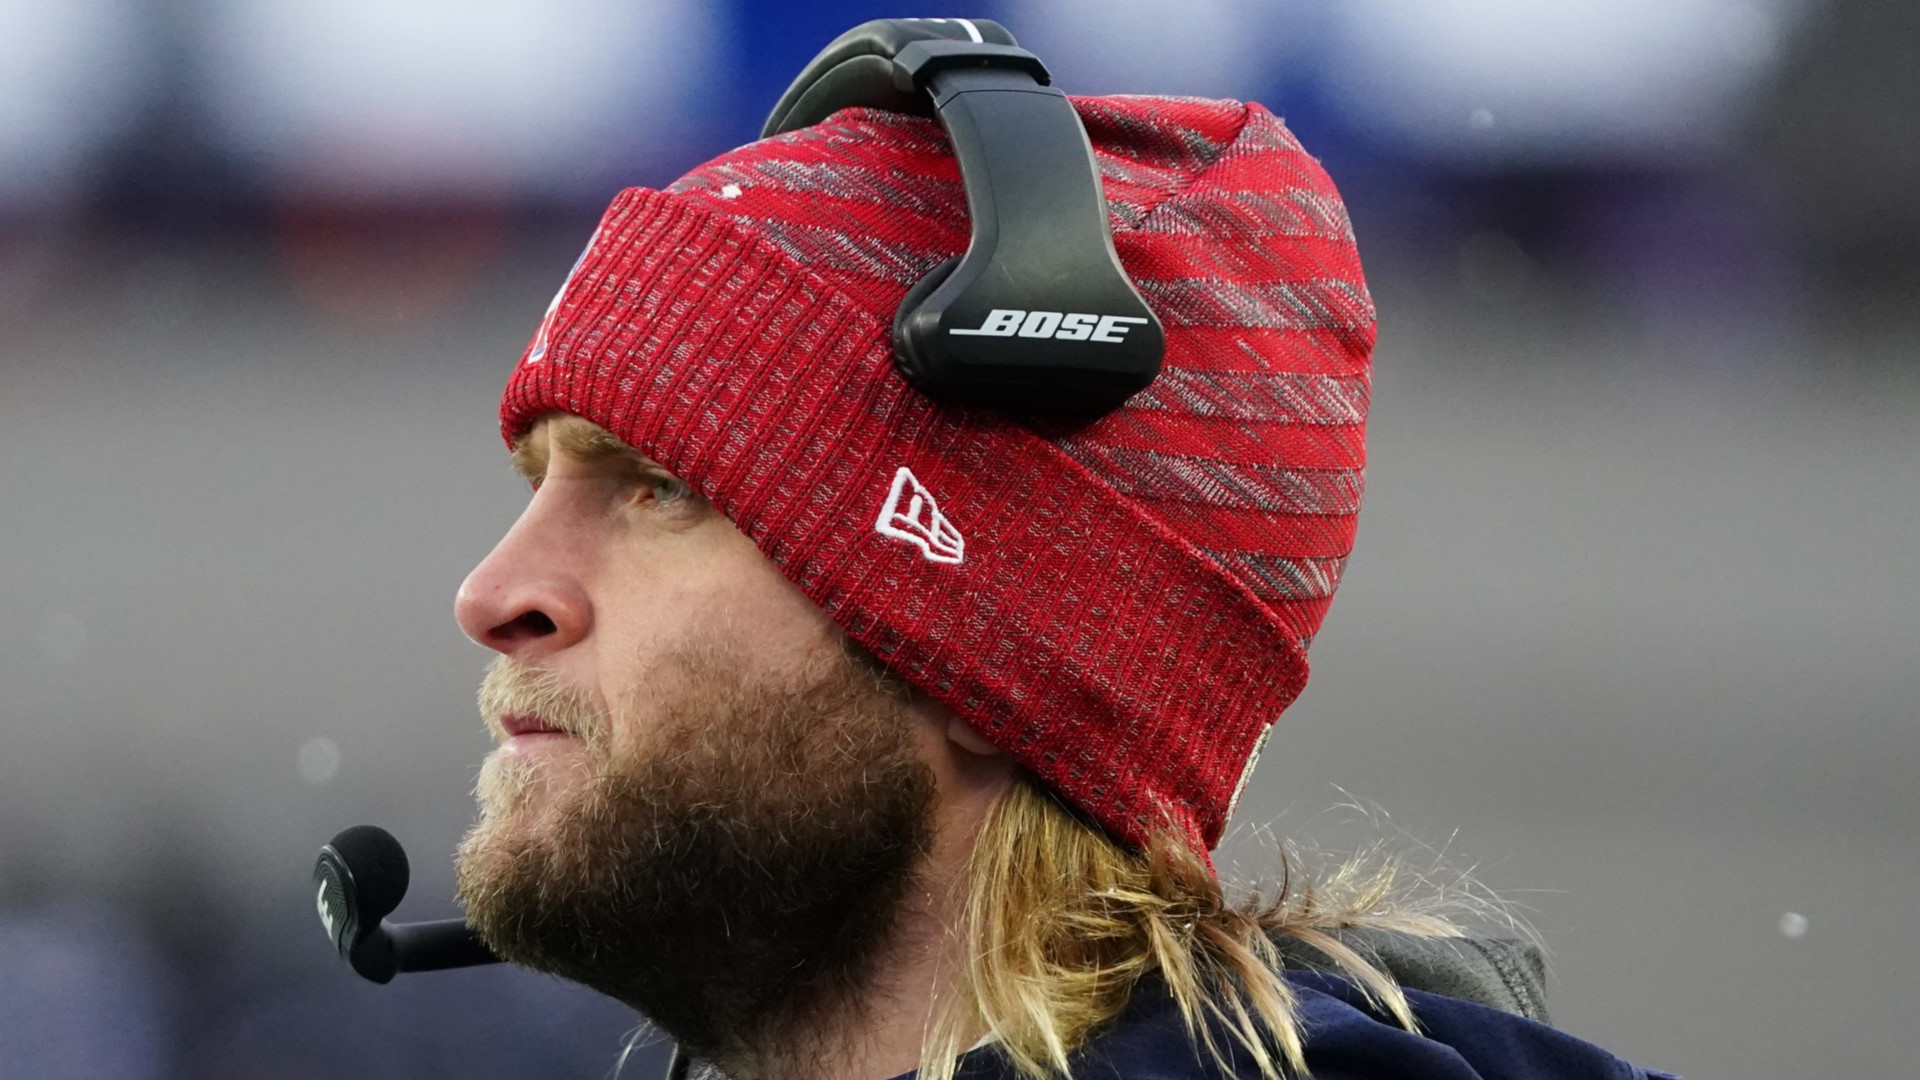 Steve Belichick Wants To Be ‘Different’ Than Bill Belichick In New
Job